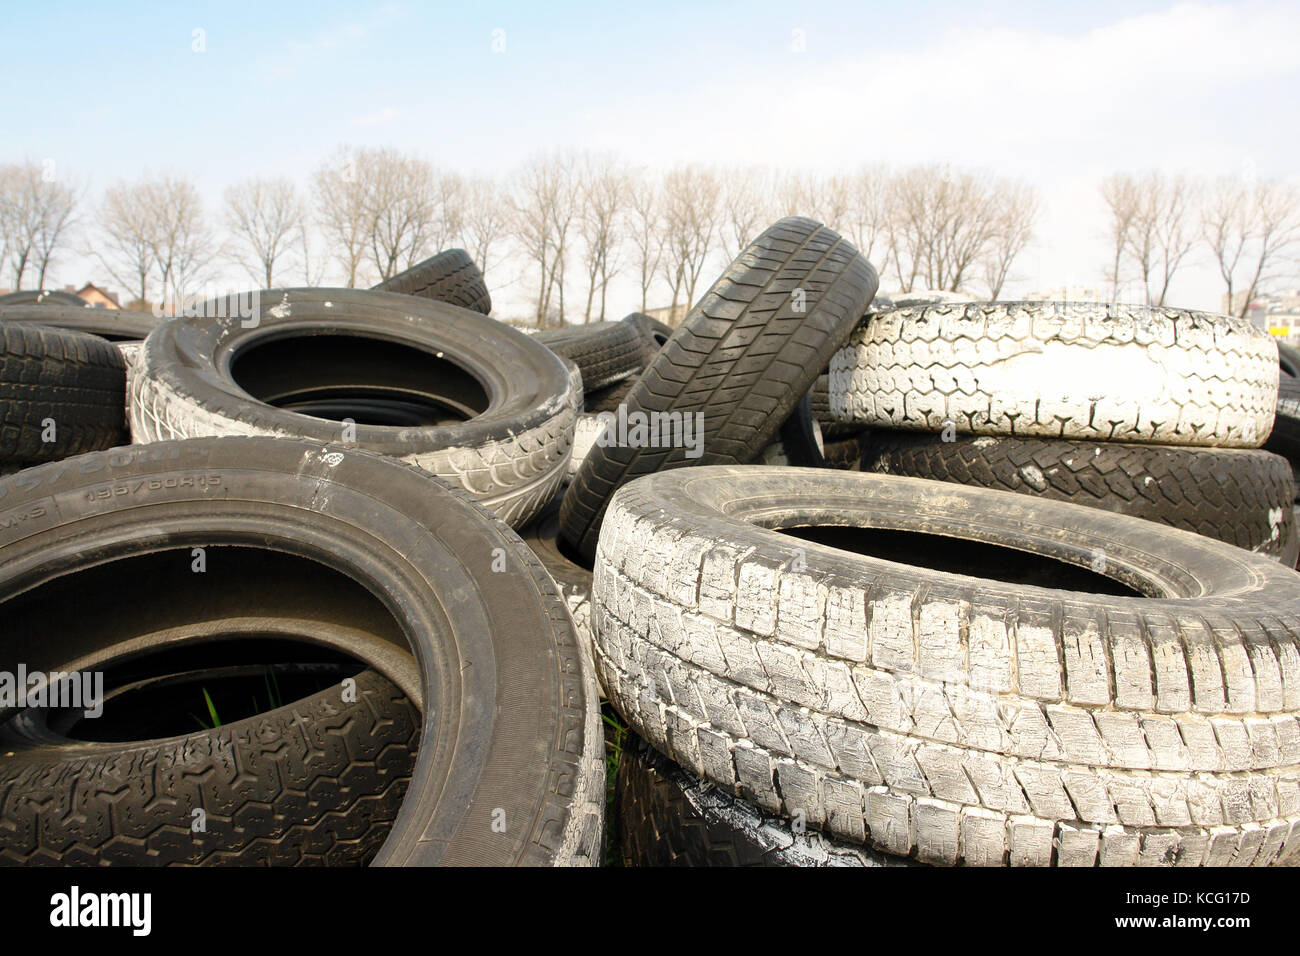 Heap of used car tires with trees in the background Stock Photo